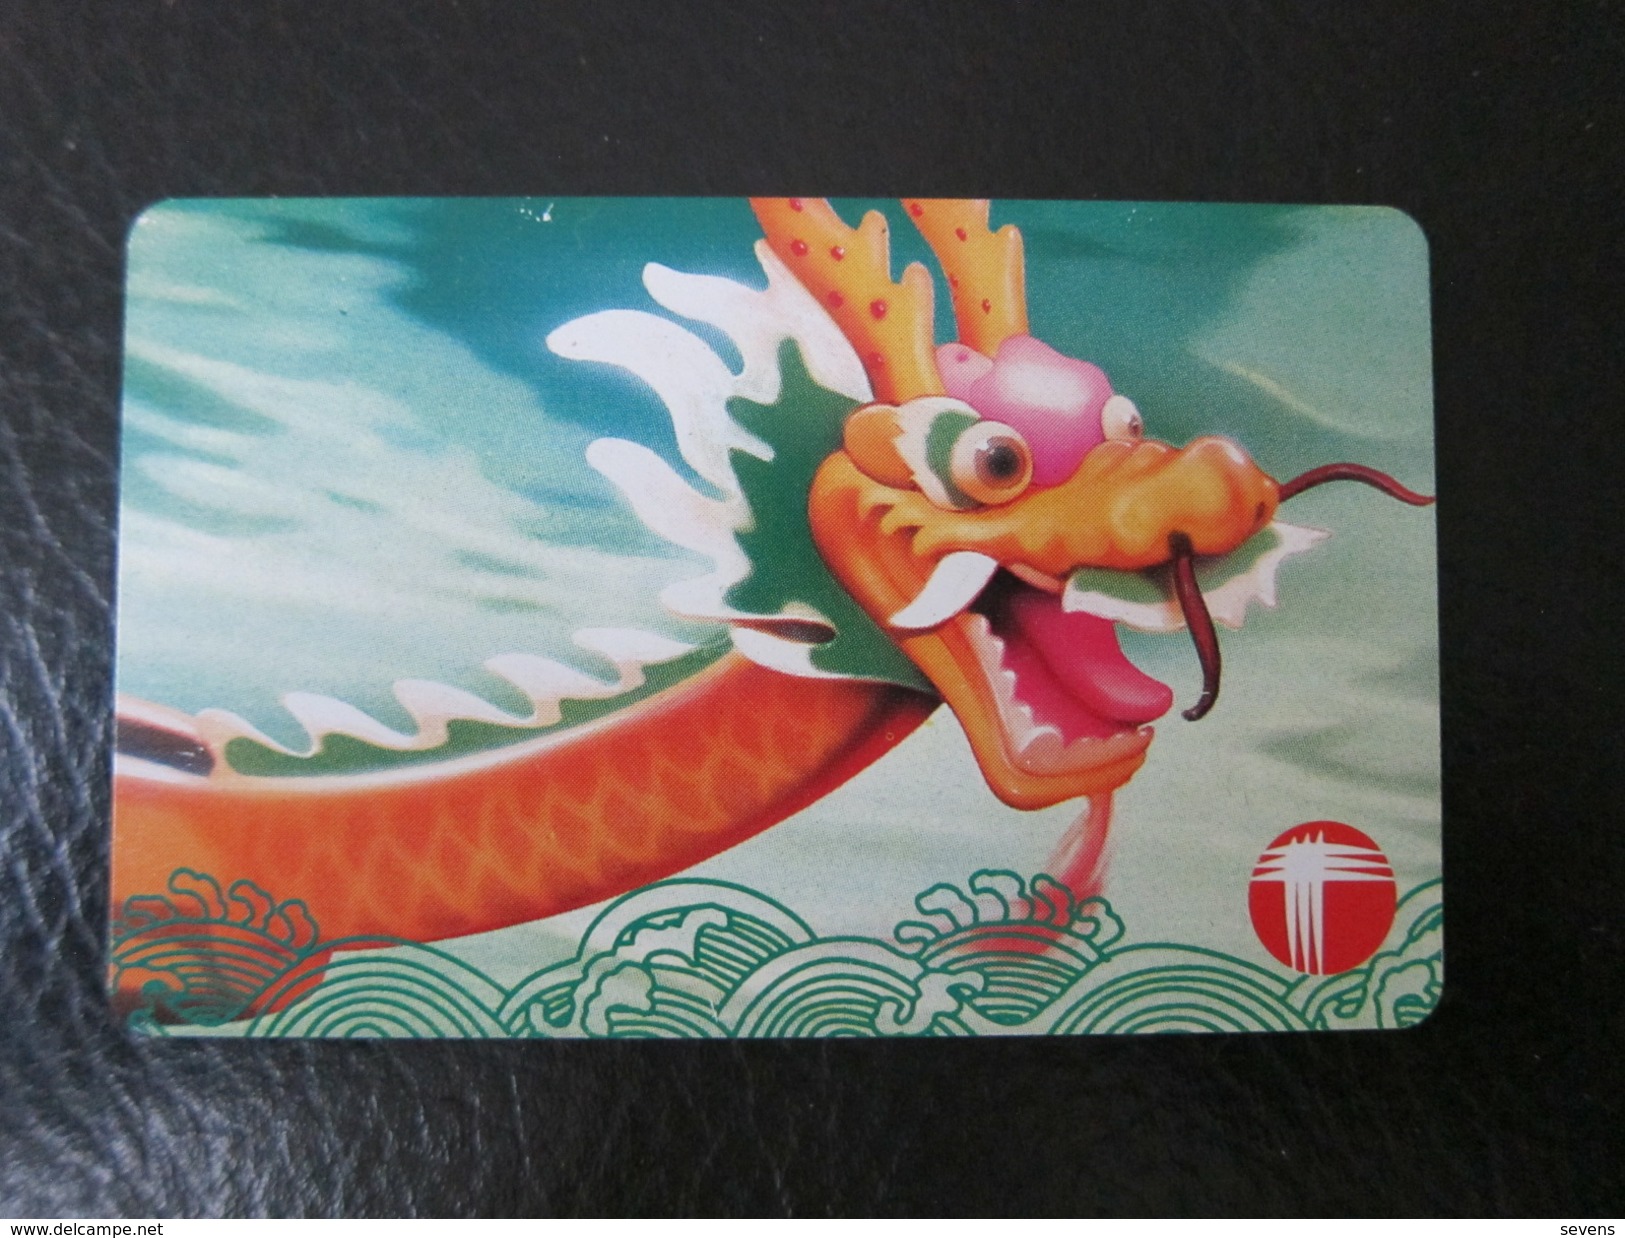 Limited Issued Autelca Phonecard,Dragon Boat Festive, Set Of 1,mint(with Tiny Scratch) - Hong Kong